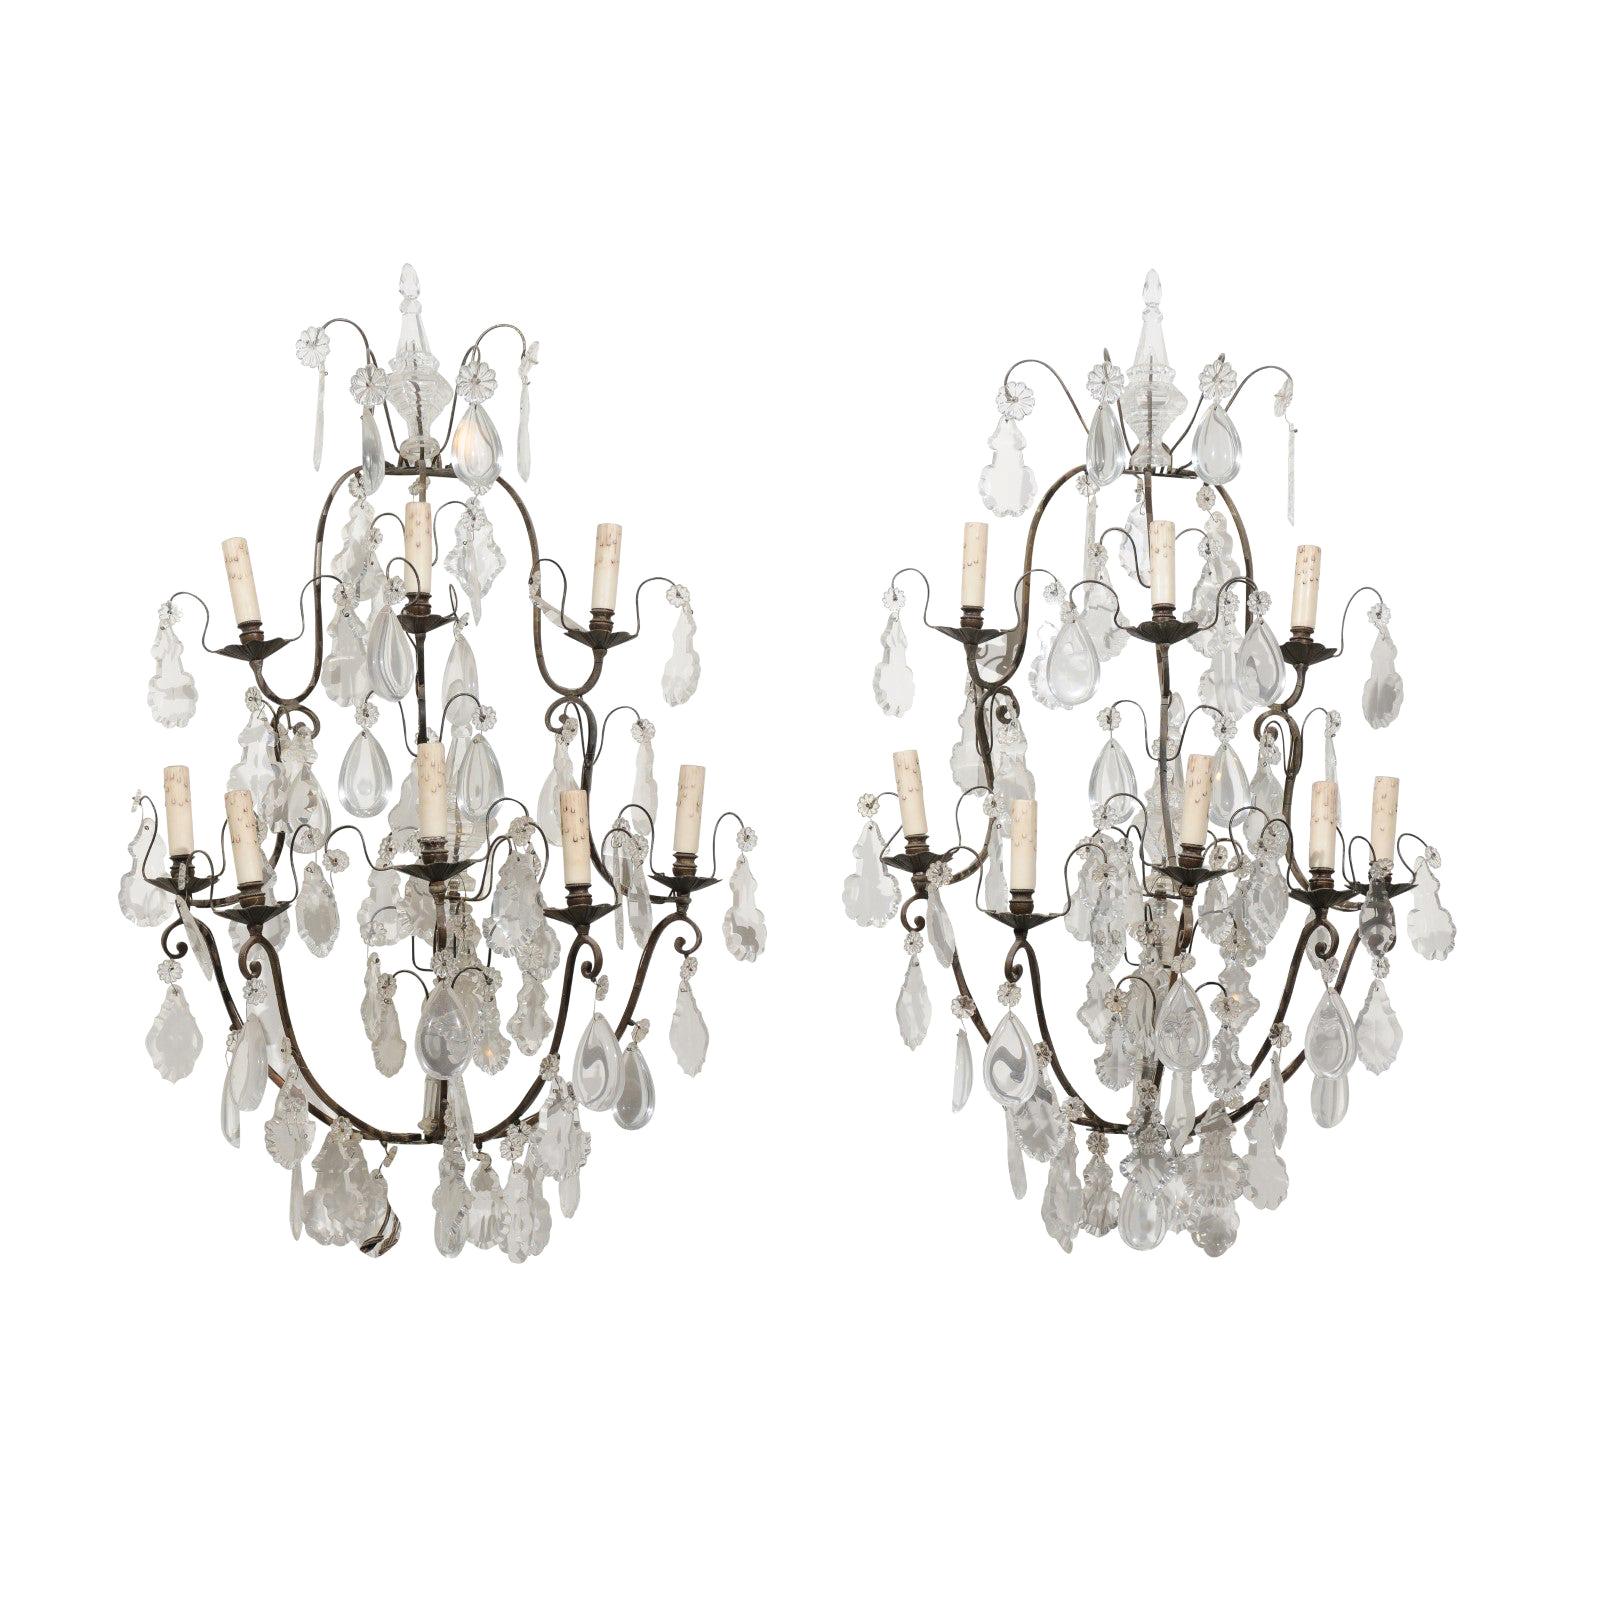 Pair of French 19th Century Crystal Eight-Light Wall Sconces with Iron Armature